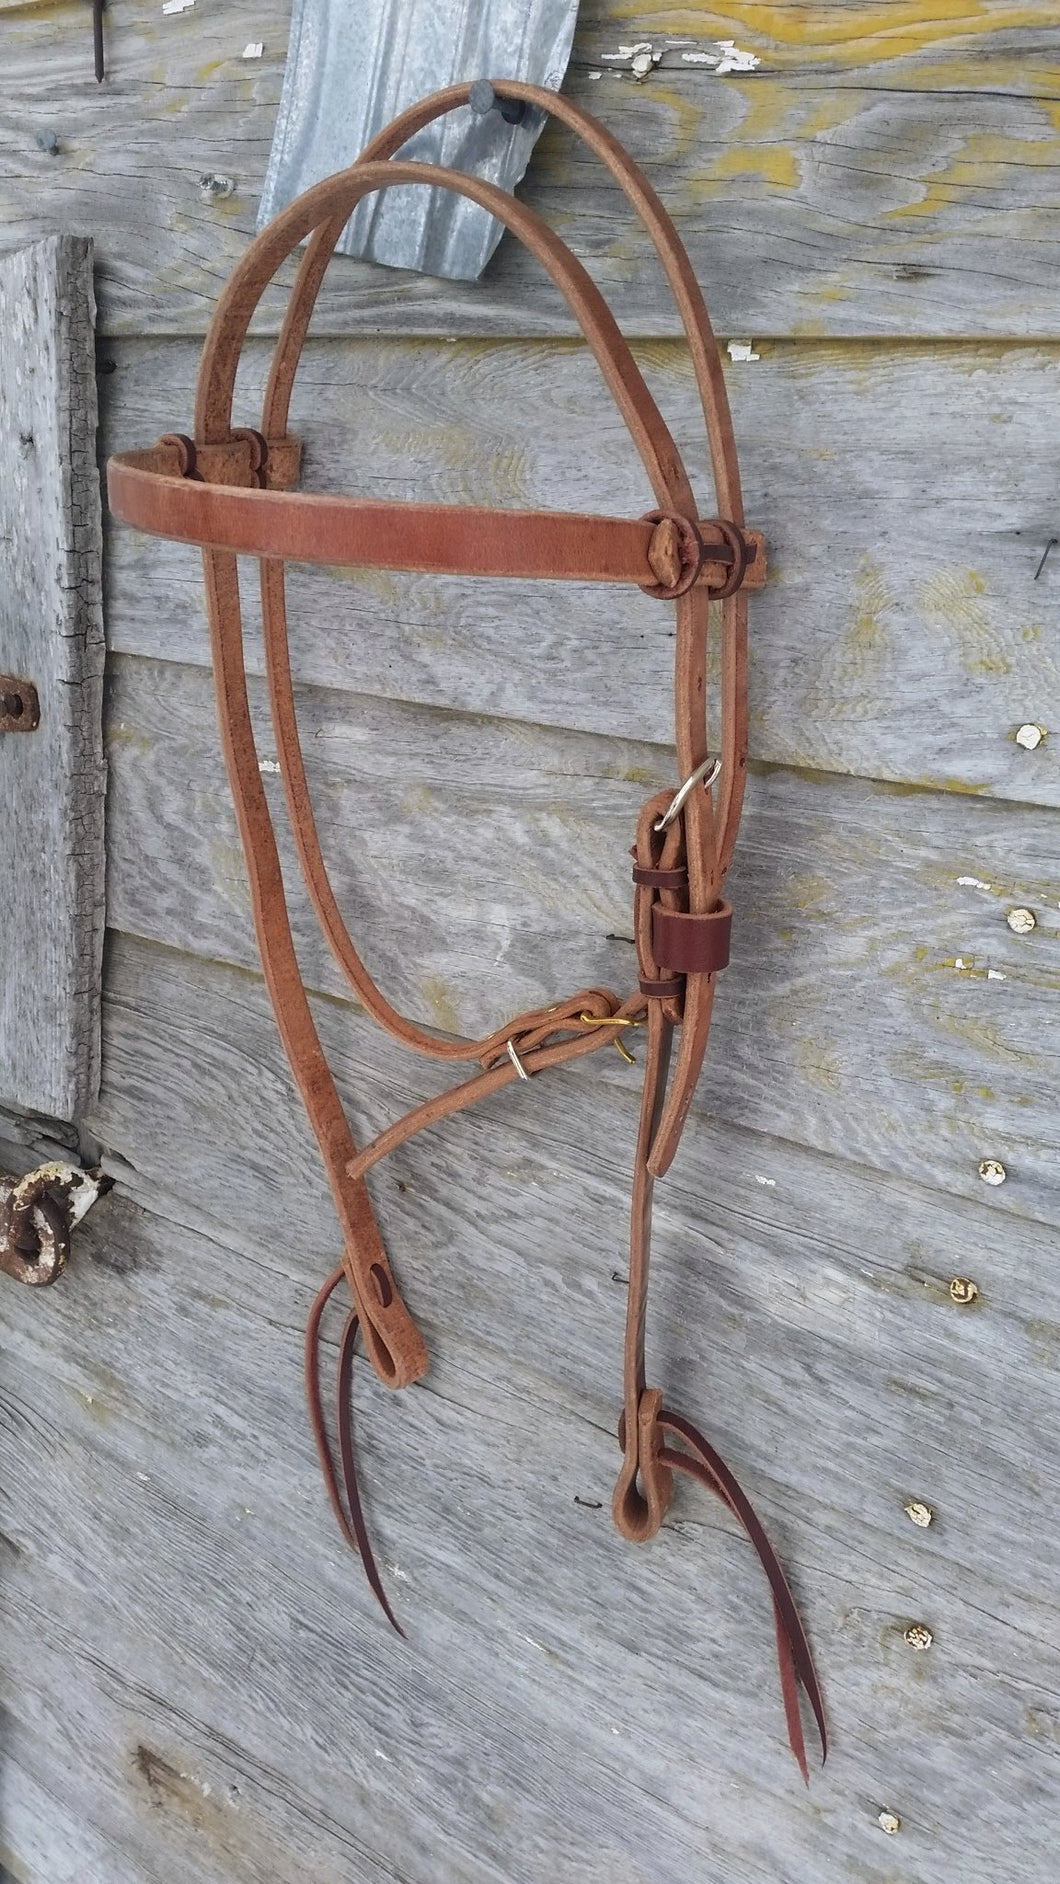 Harness Leather Browband Headstall